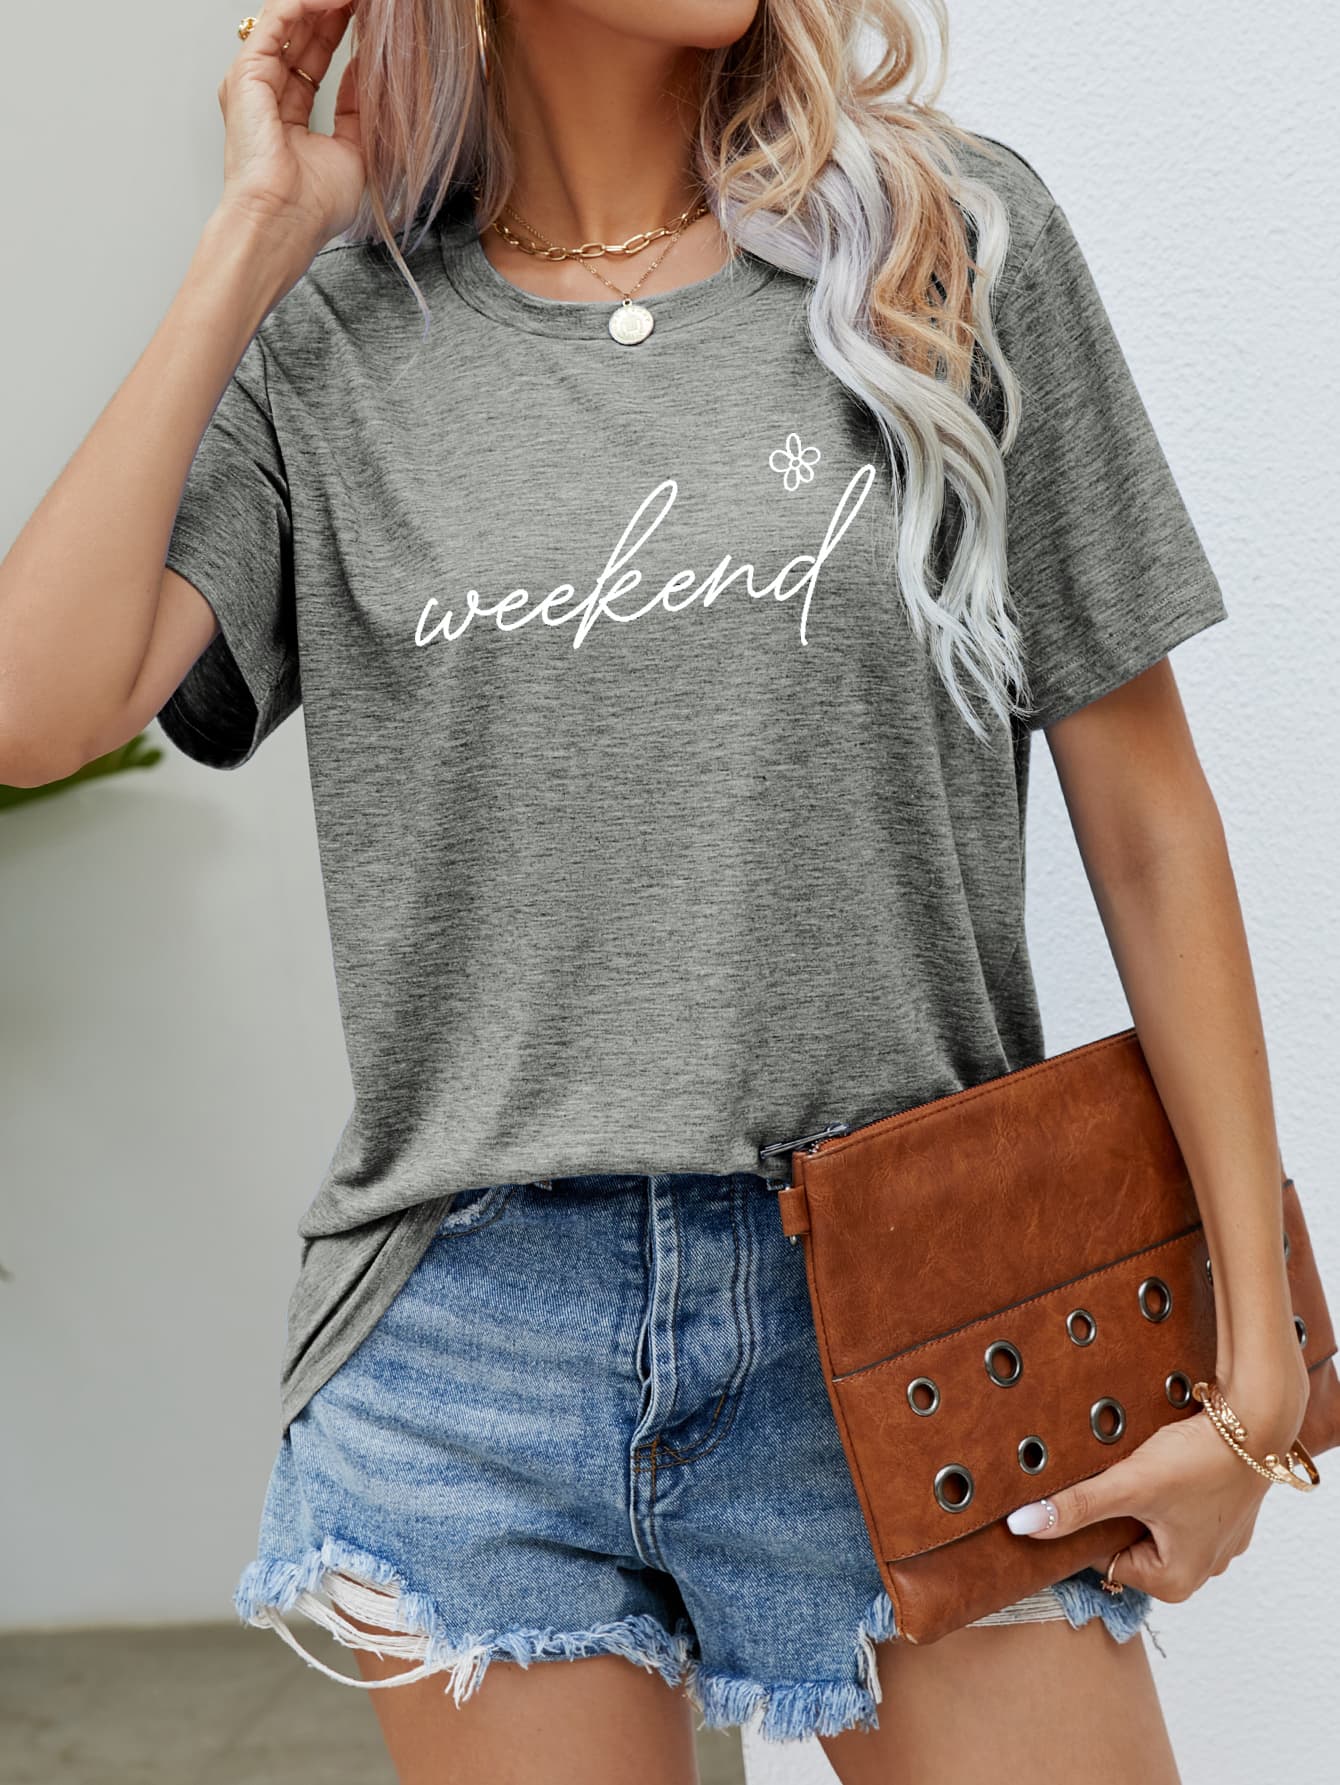 WEEKEND Flower Graphic Short Sleeve Tee - Gray / S - T-Shirts - Shirts & Tops - 1 - 2024